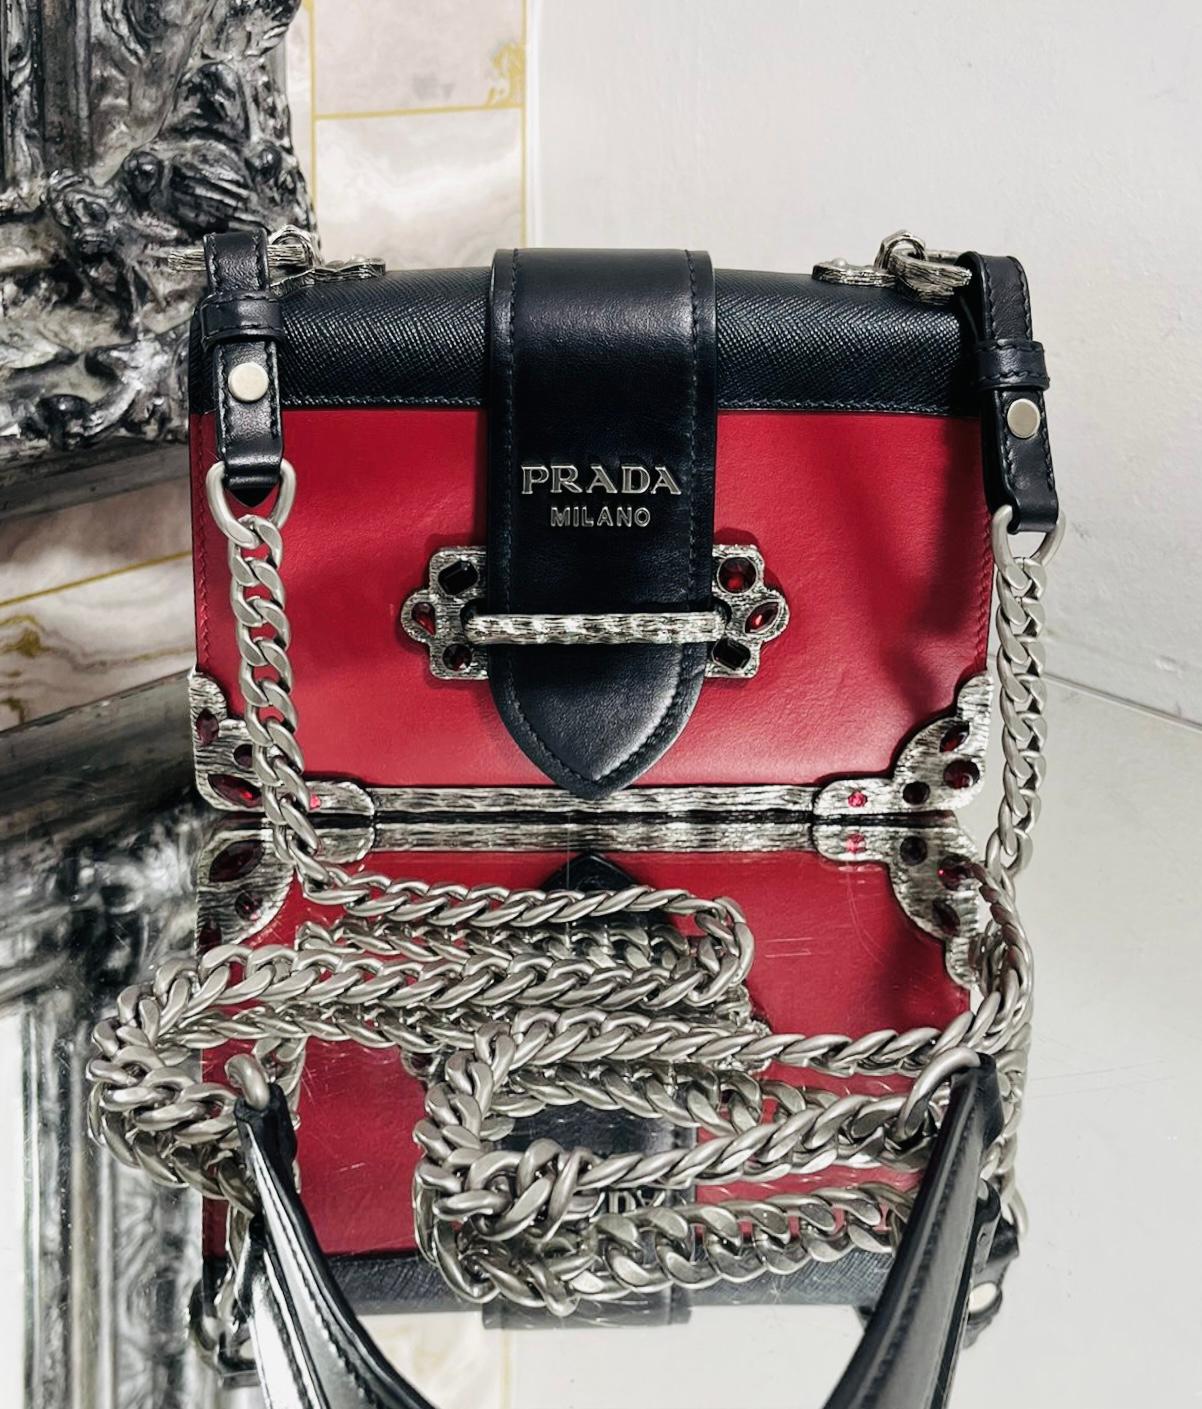 Prada Cashier Crystal Embellished Leather Bag

Red shoulder bag designed with black flap closure detailed with silver 'Prada' logo lettering.

Featuring decorative metal plating to the edges and centre embellished with red crystals.

Styled with